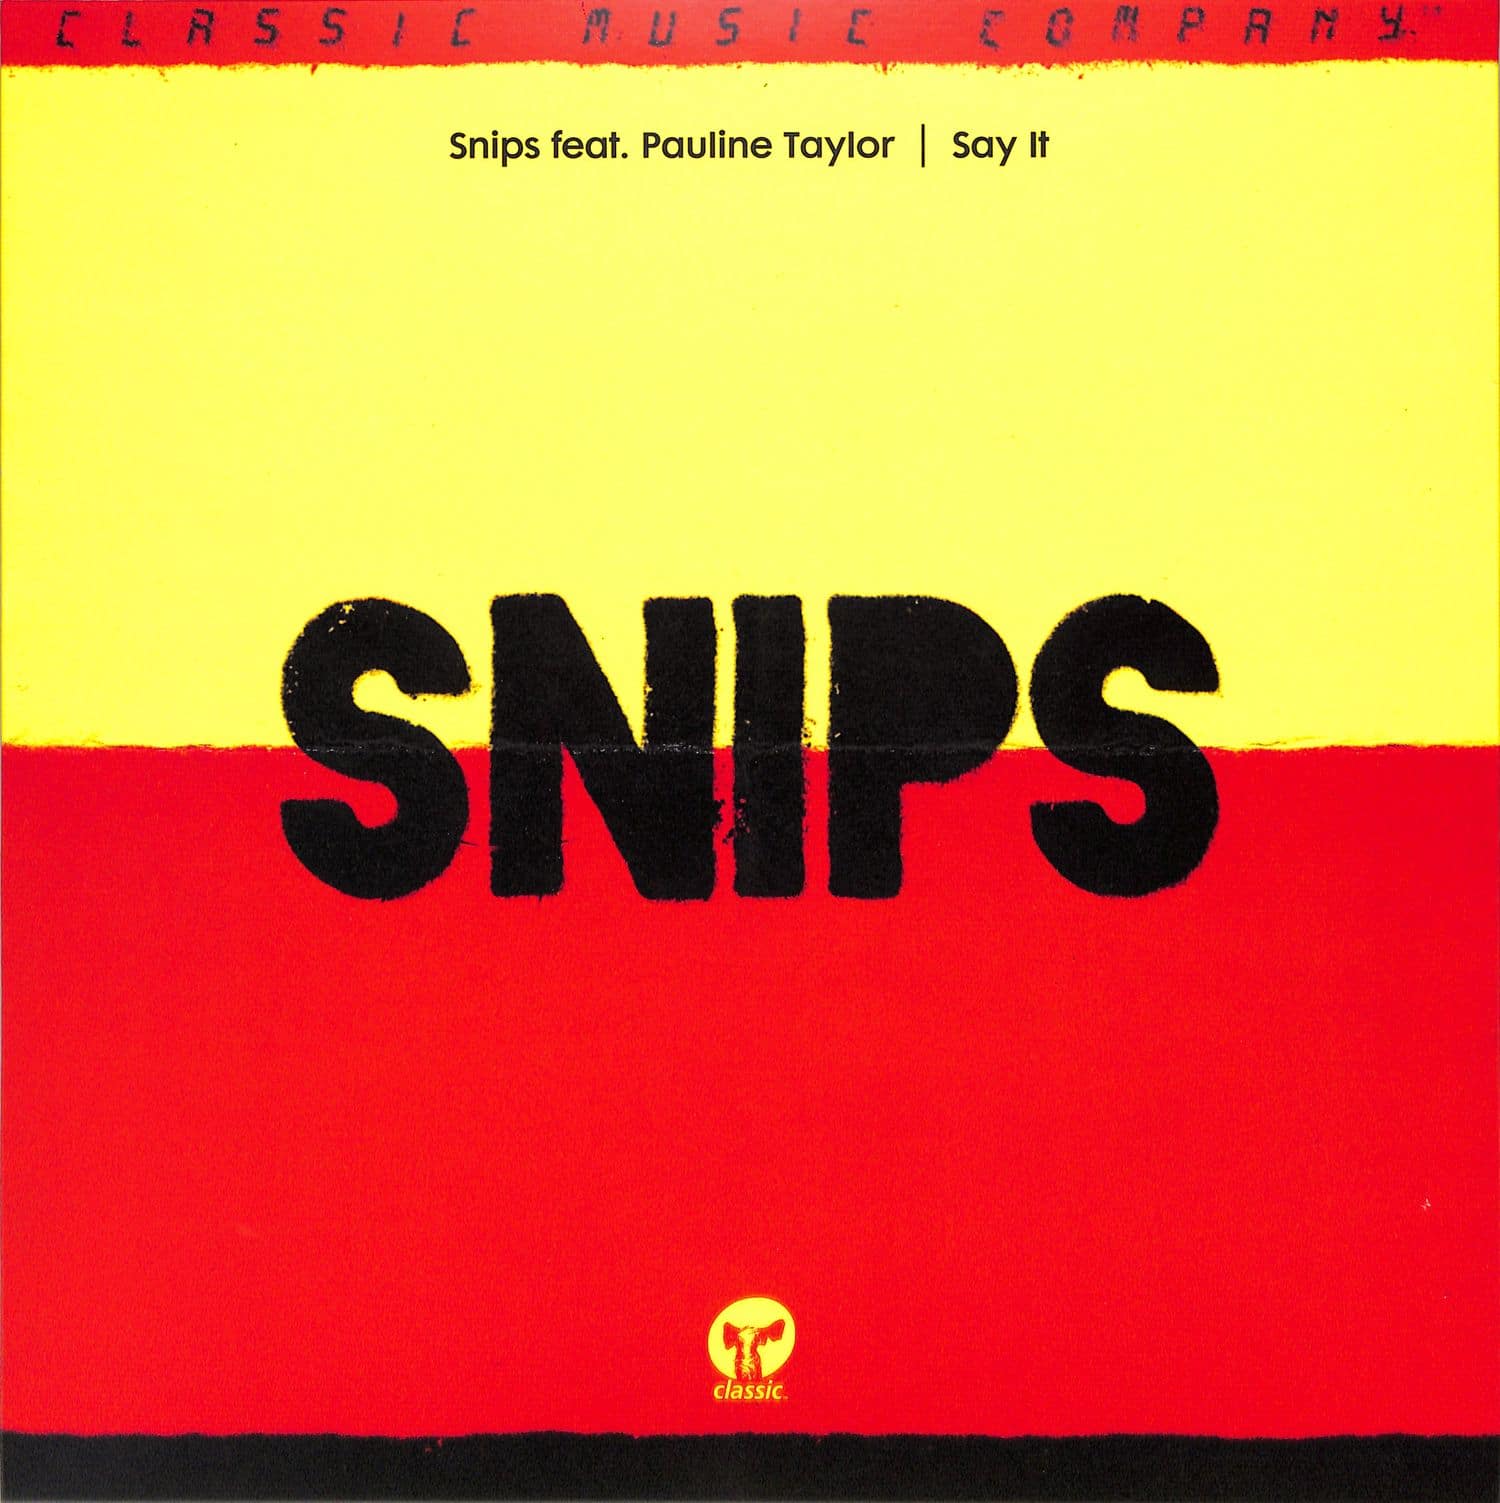 Snips featuring Pauline Taylor - SAY IT 